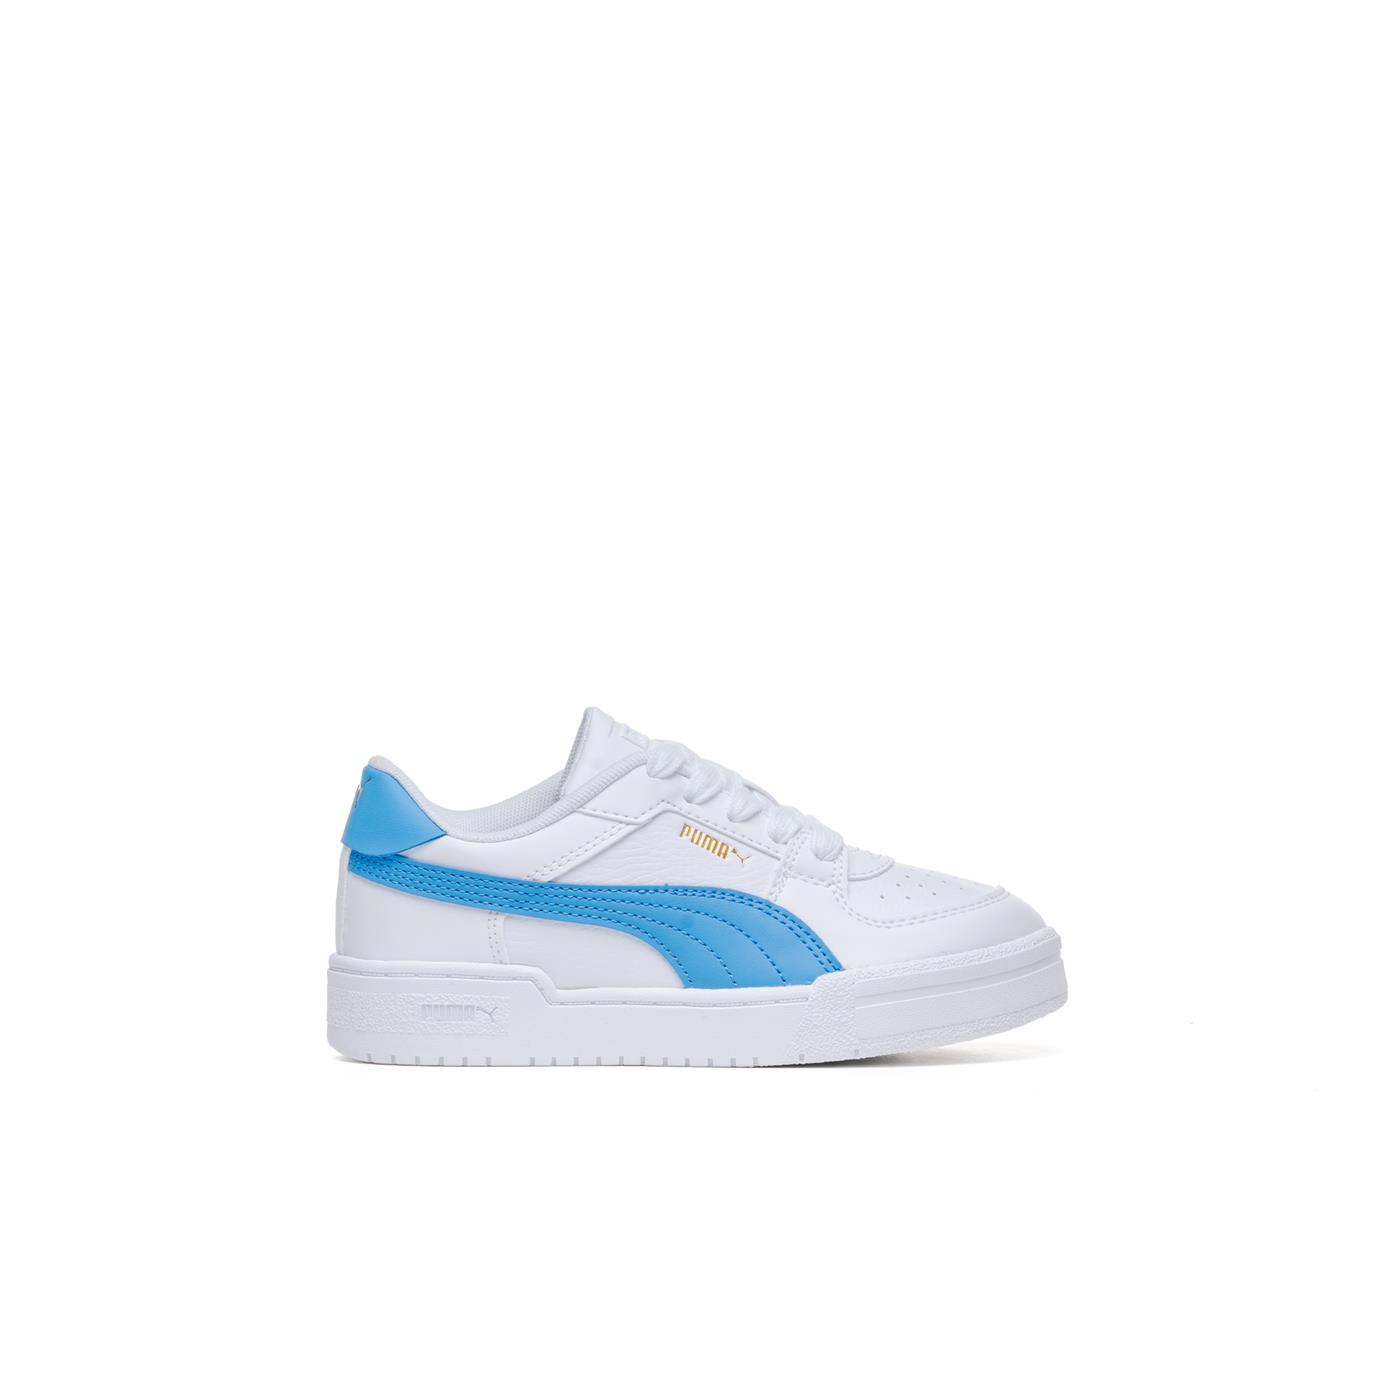 Child 382278 CA | mujer 16 sneakers | | RvceShops PUMA White PS Sneakers Classic - for Puma amarillas Pro